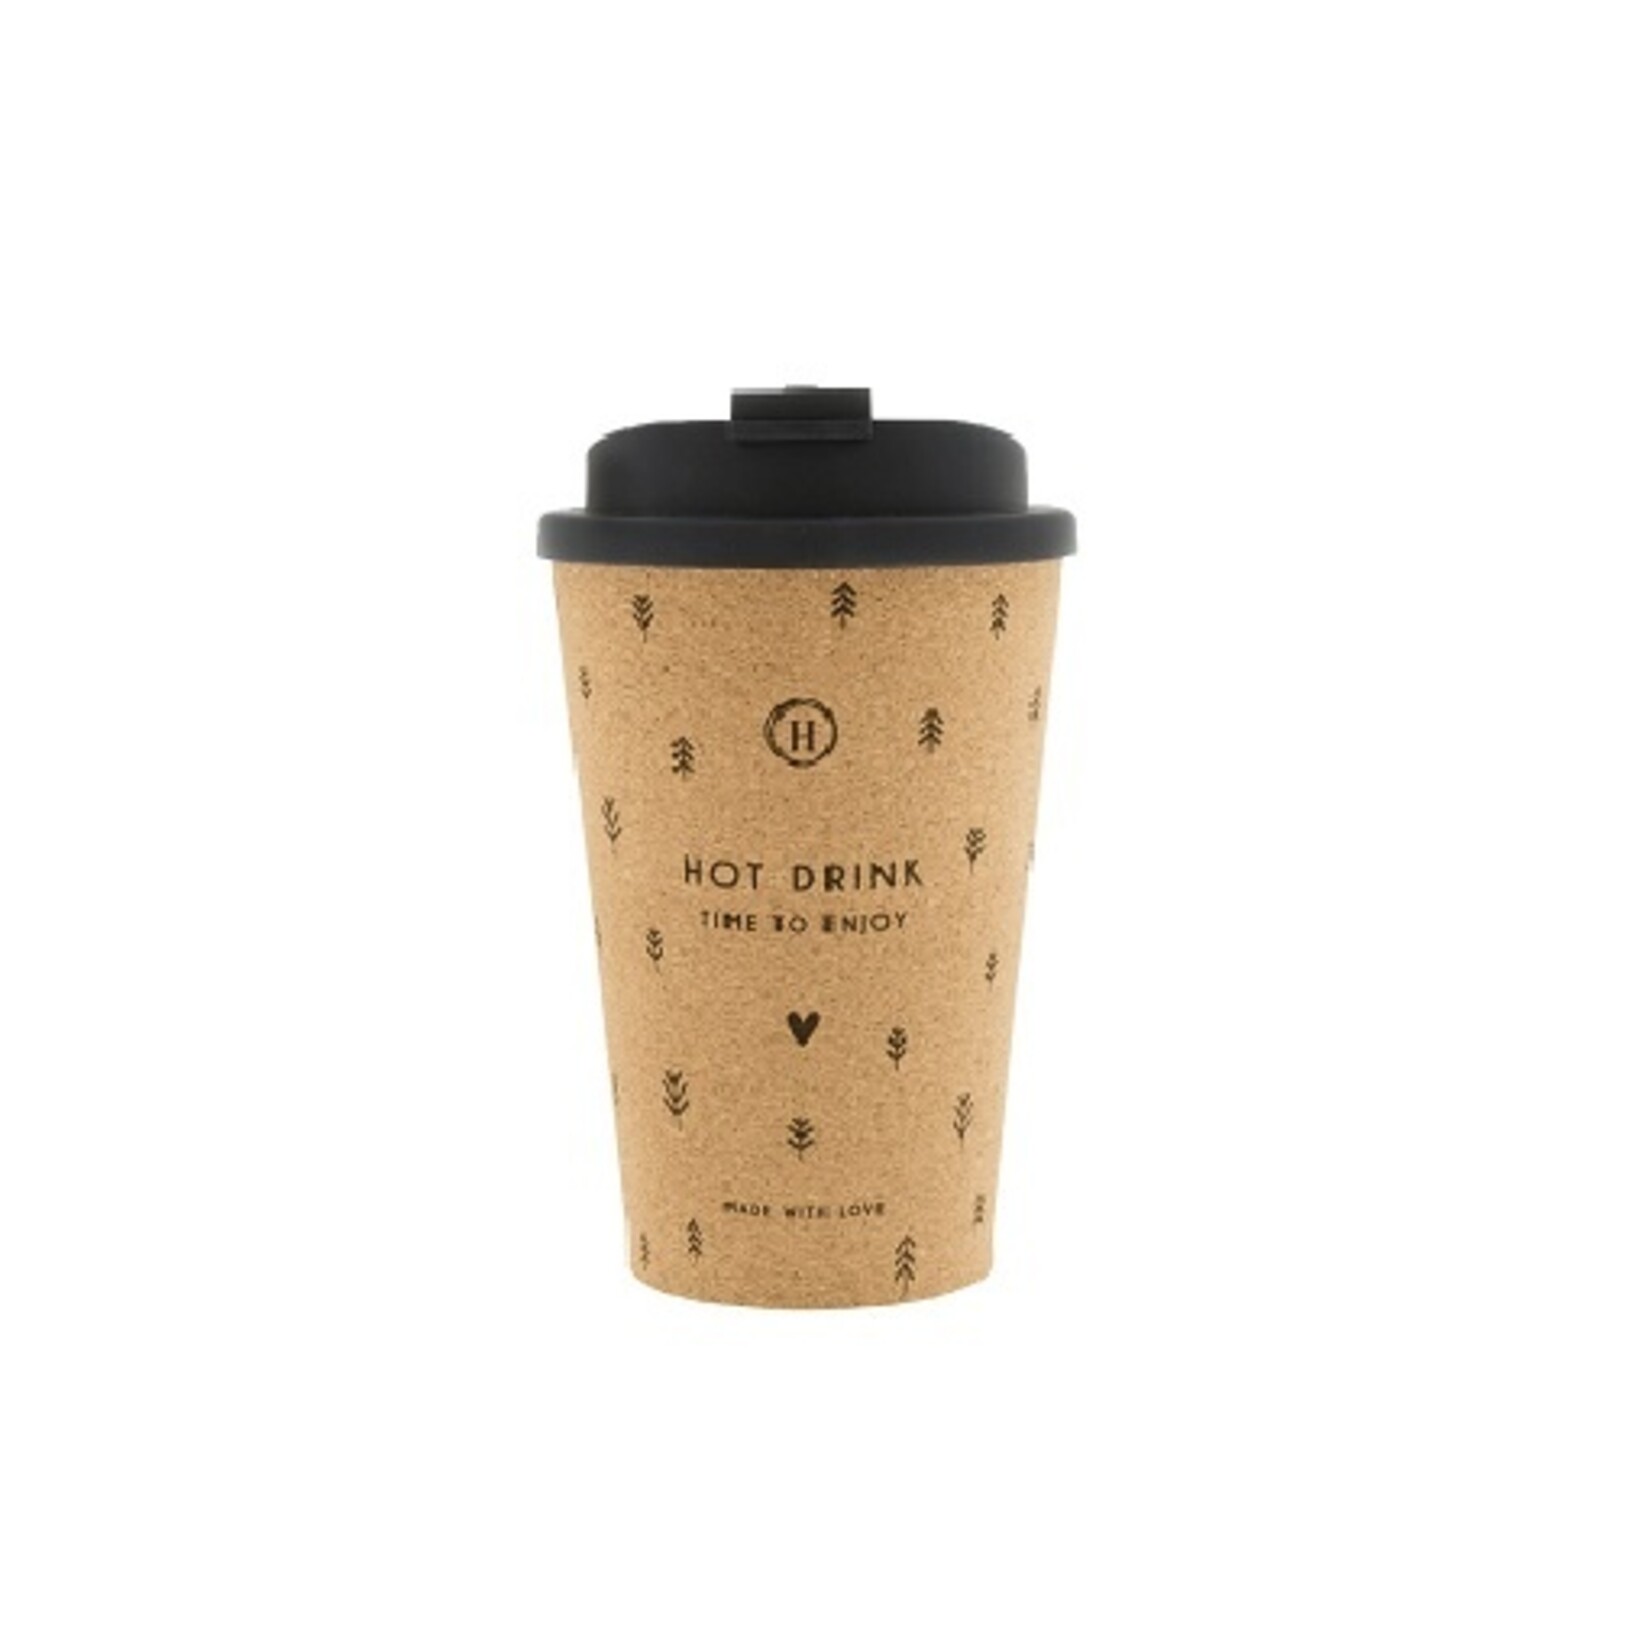 Bastion Collections Coffee to go mug - Hot drink, time to enjoy